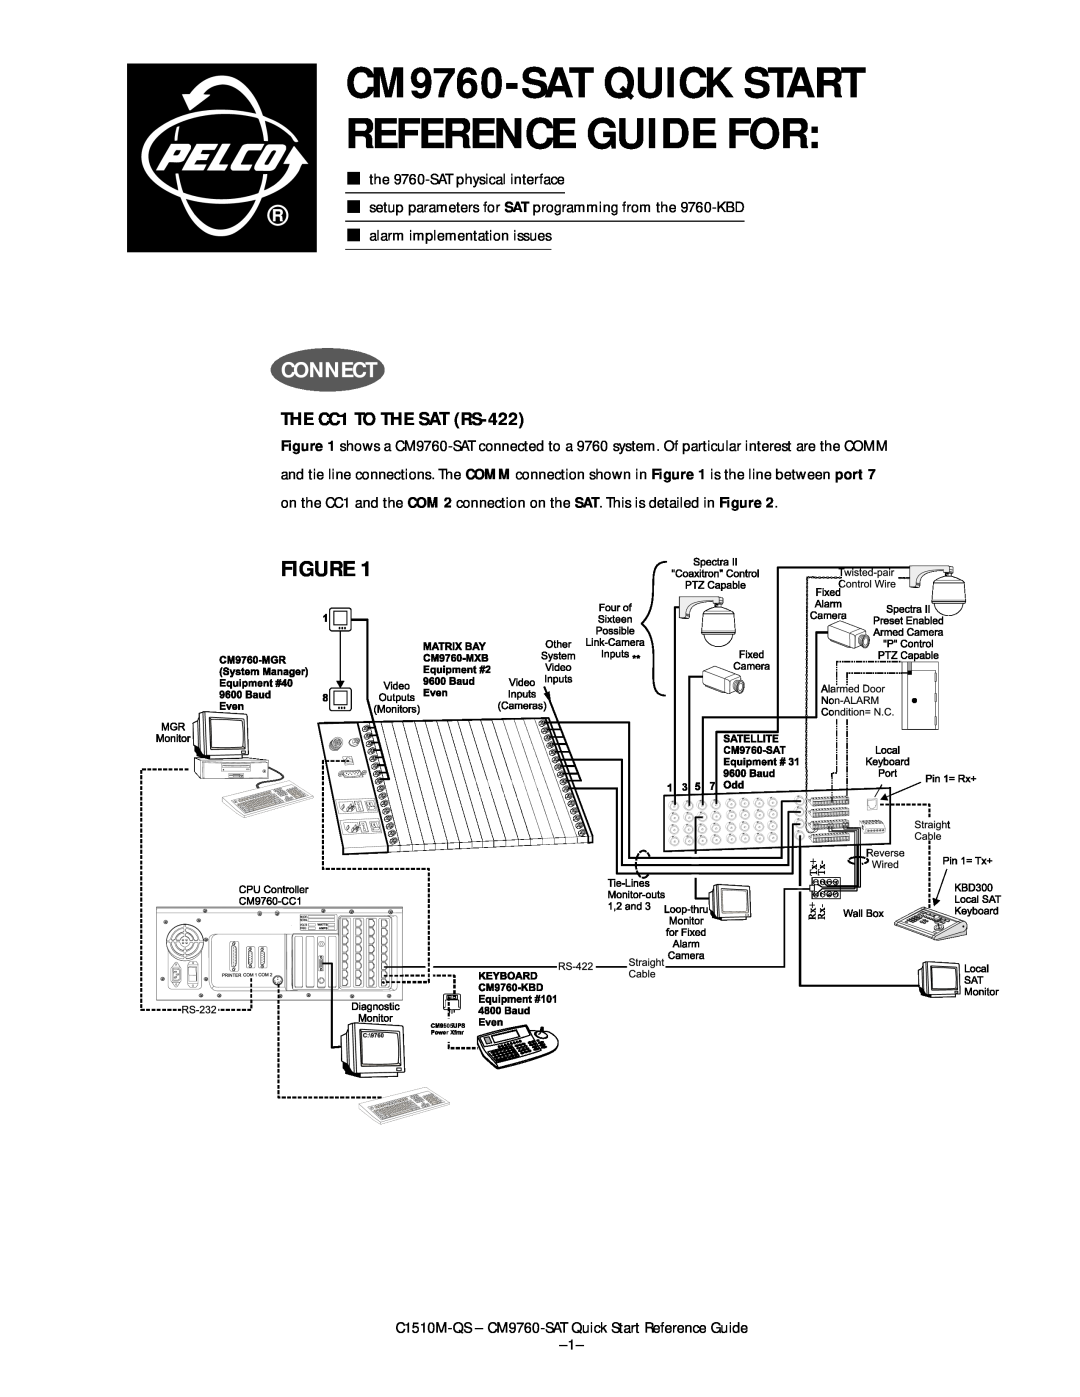 Pelco warranty Connect, CM9760-SAT QUICK START REFERENCE GUIDE FOR 